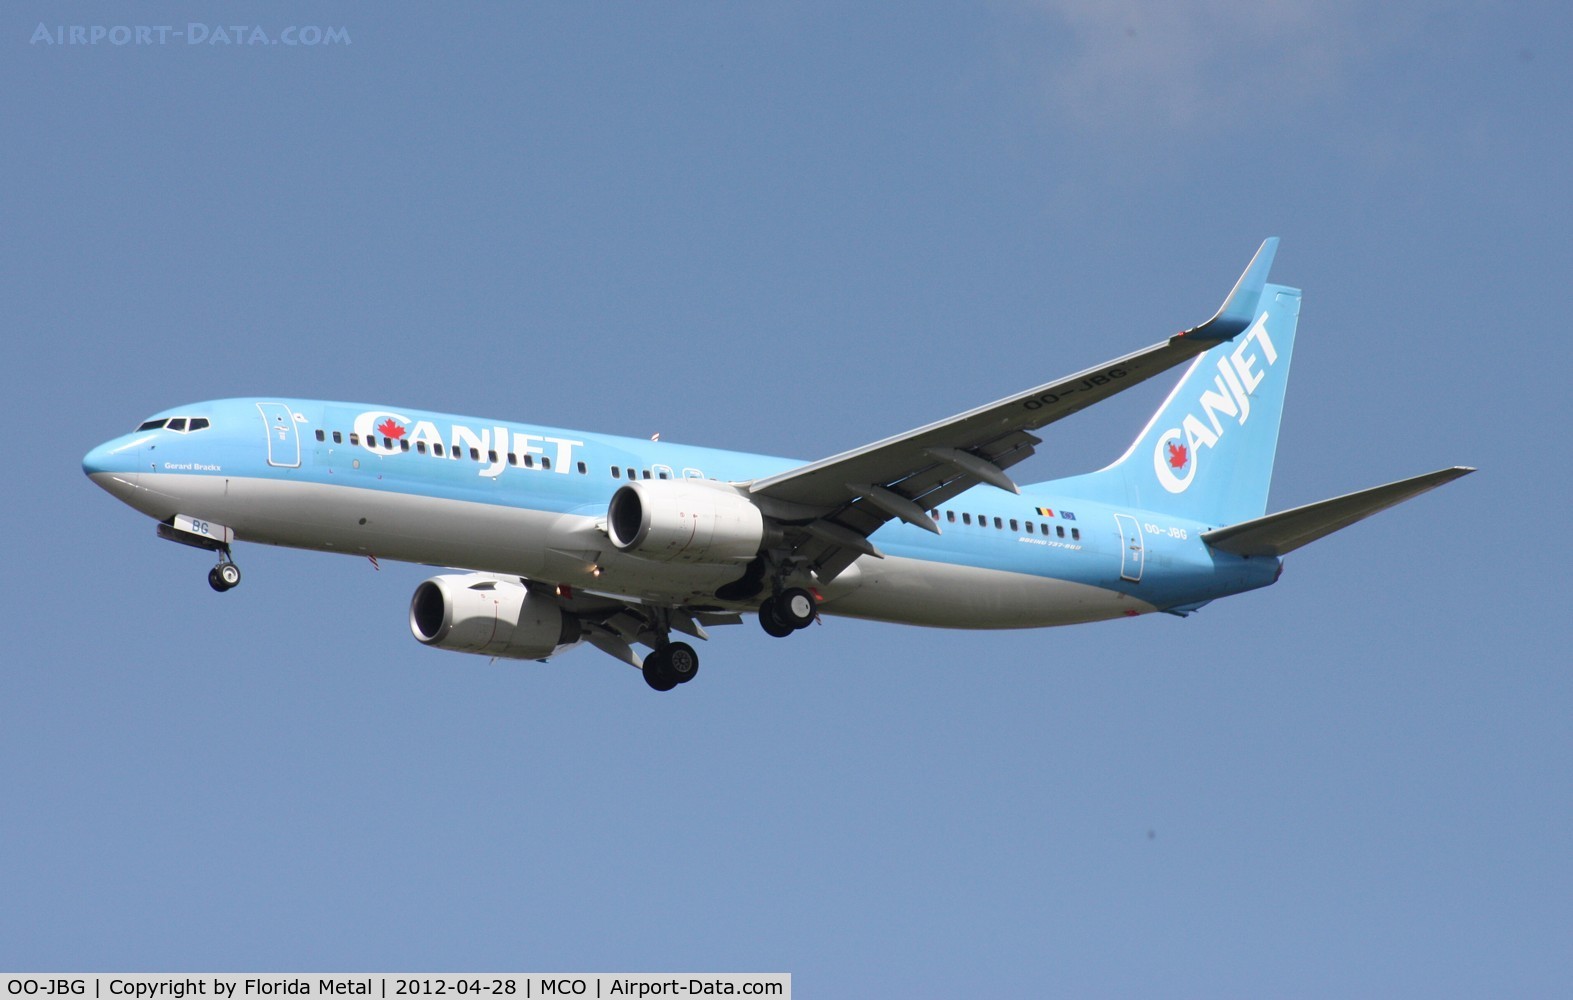 OO-JBG, 2008 Boeing 737-8K5 C/N 35142, Canjet 737-800 - in the colors still of Jetairfly of Belgium part of the TUI family